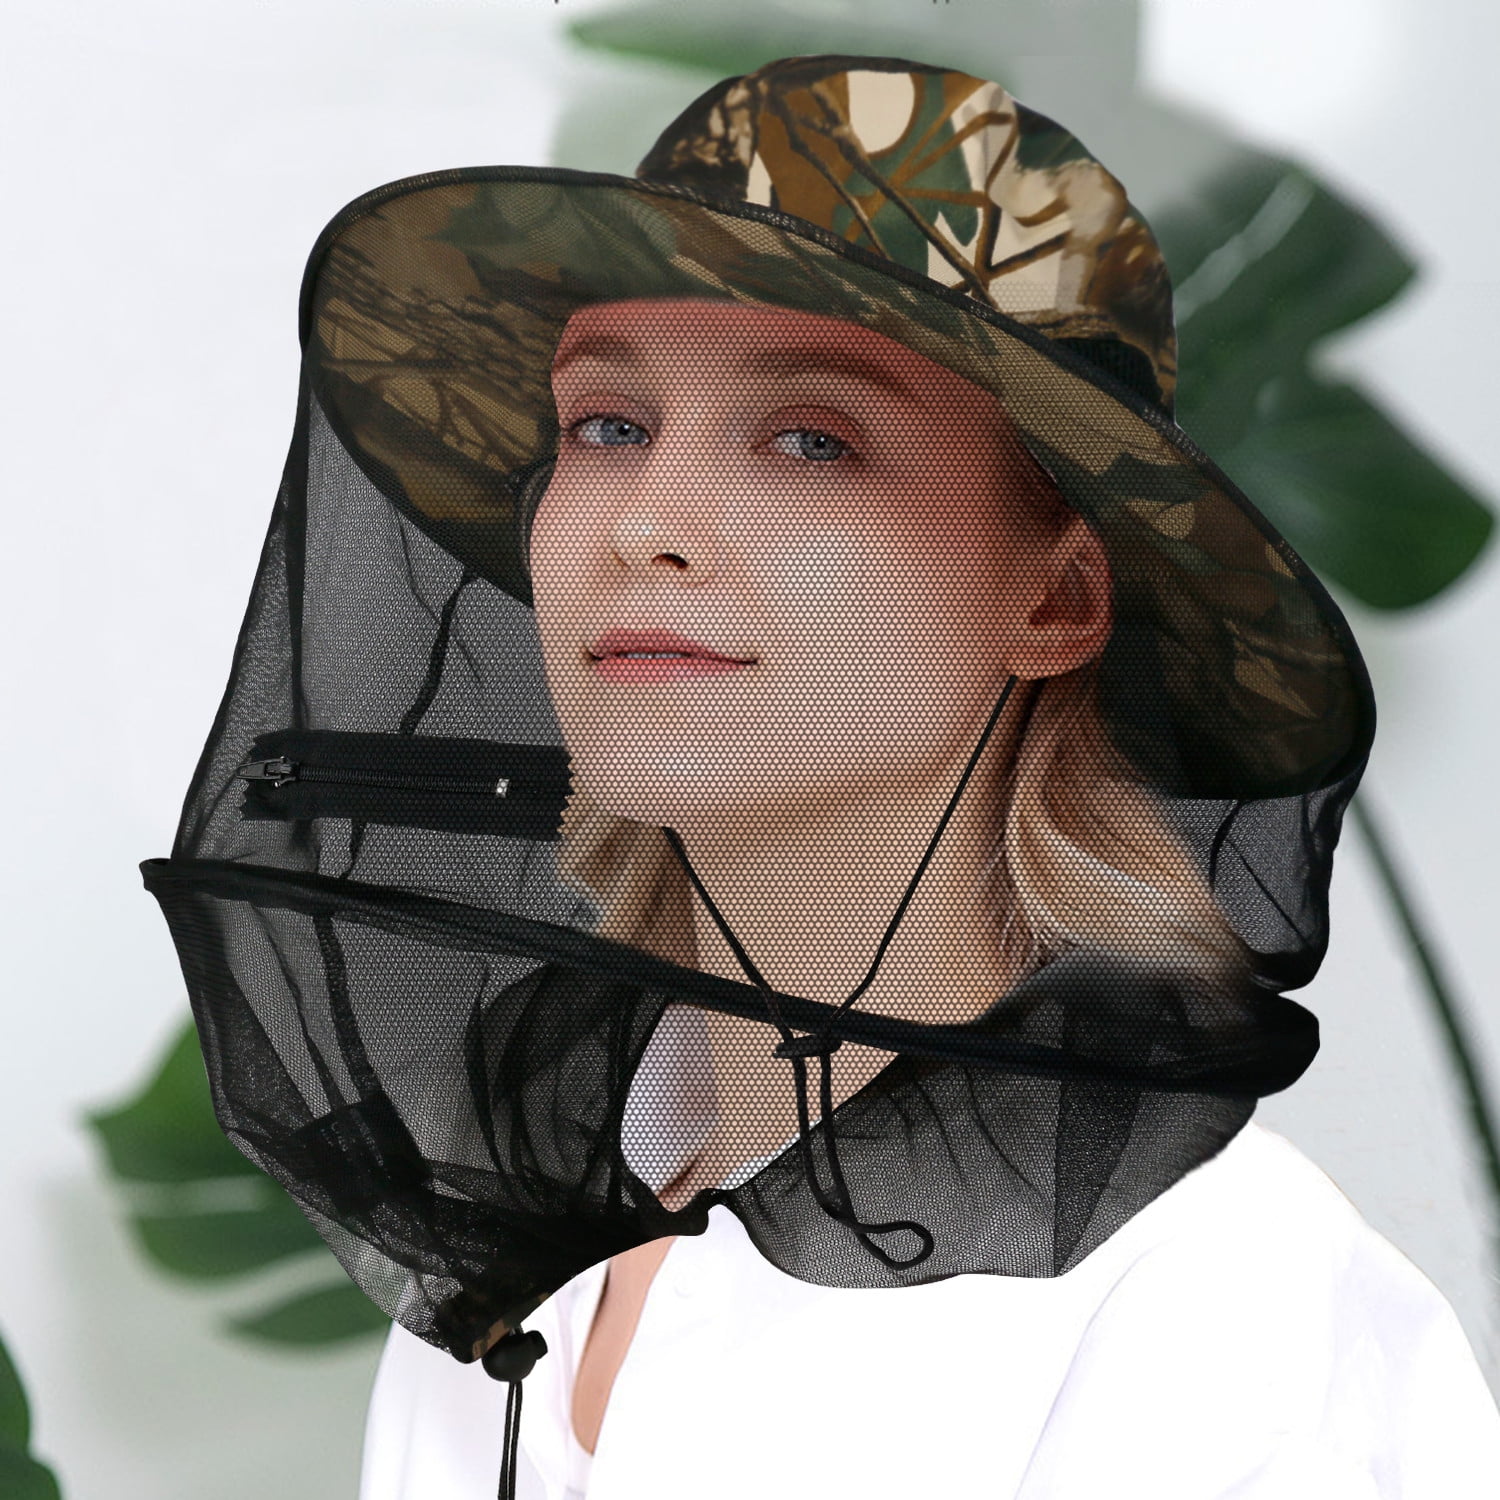 WOODLAND CAMOUFLAGE MILITARY STYLE BOONIE HAT WITH MOSQUITO INSECT NETTING 